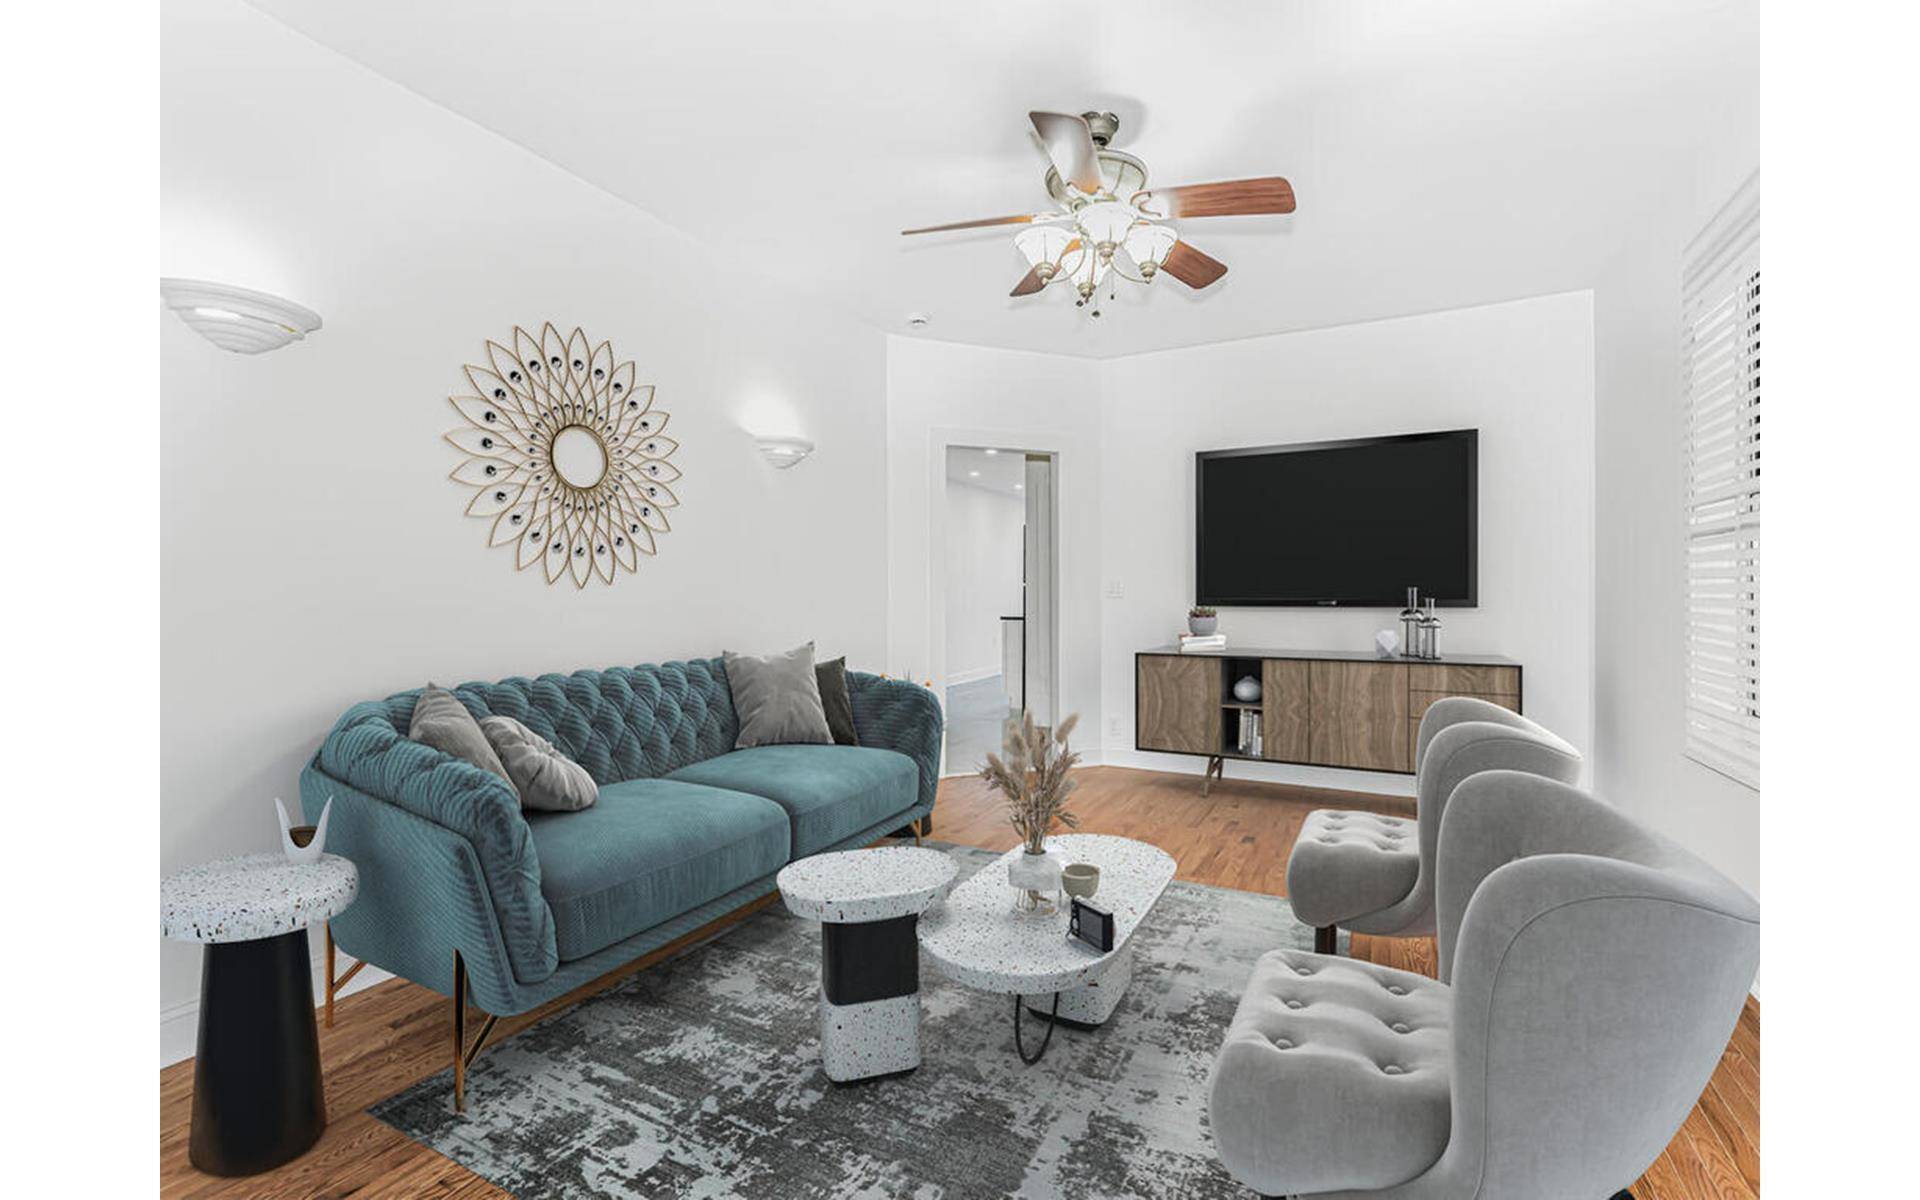 Introducing this Roommate Delight Apartment Tailored for shared living, this space boasts two separate entrances to ensure privacy and independence.